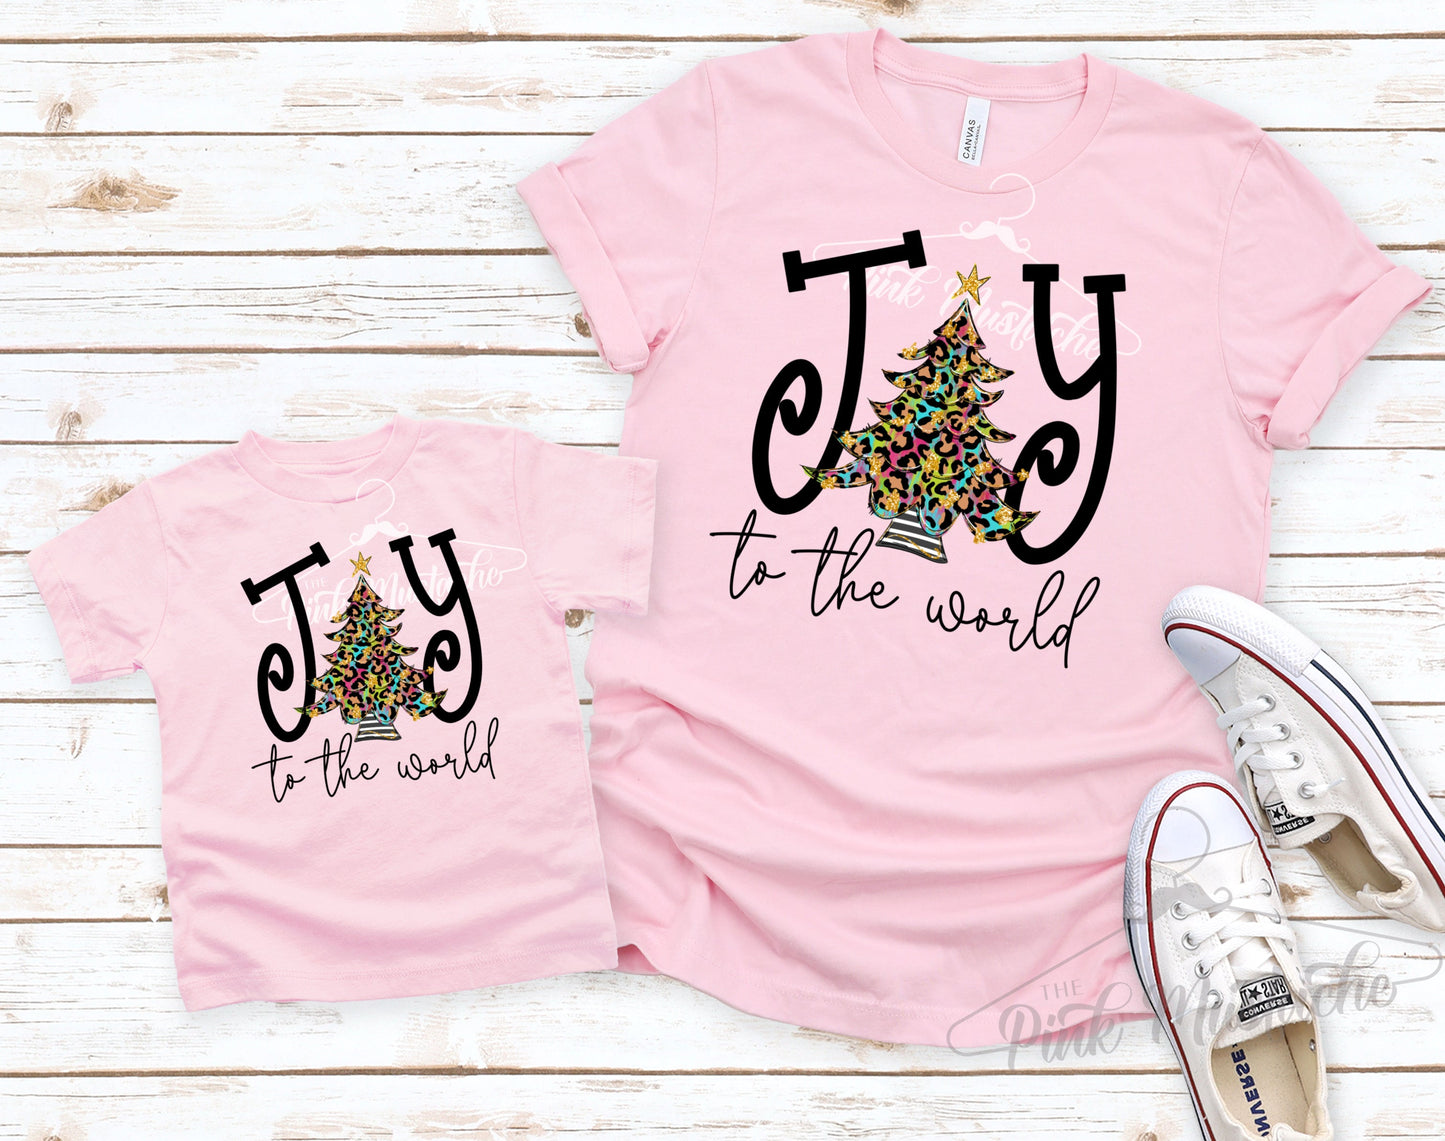 Pink Joy To The World Leopard Print Christmas Tree Tee / Toddler, Youth, and Adult Sizes/ Softstyle Tee / Christmas Shirt/ Mommy and Me